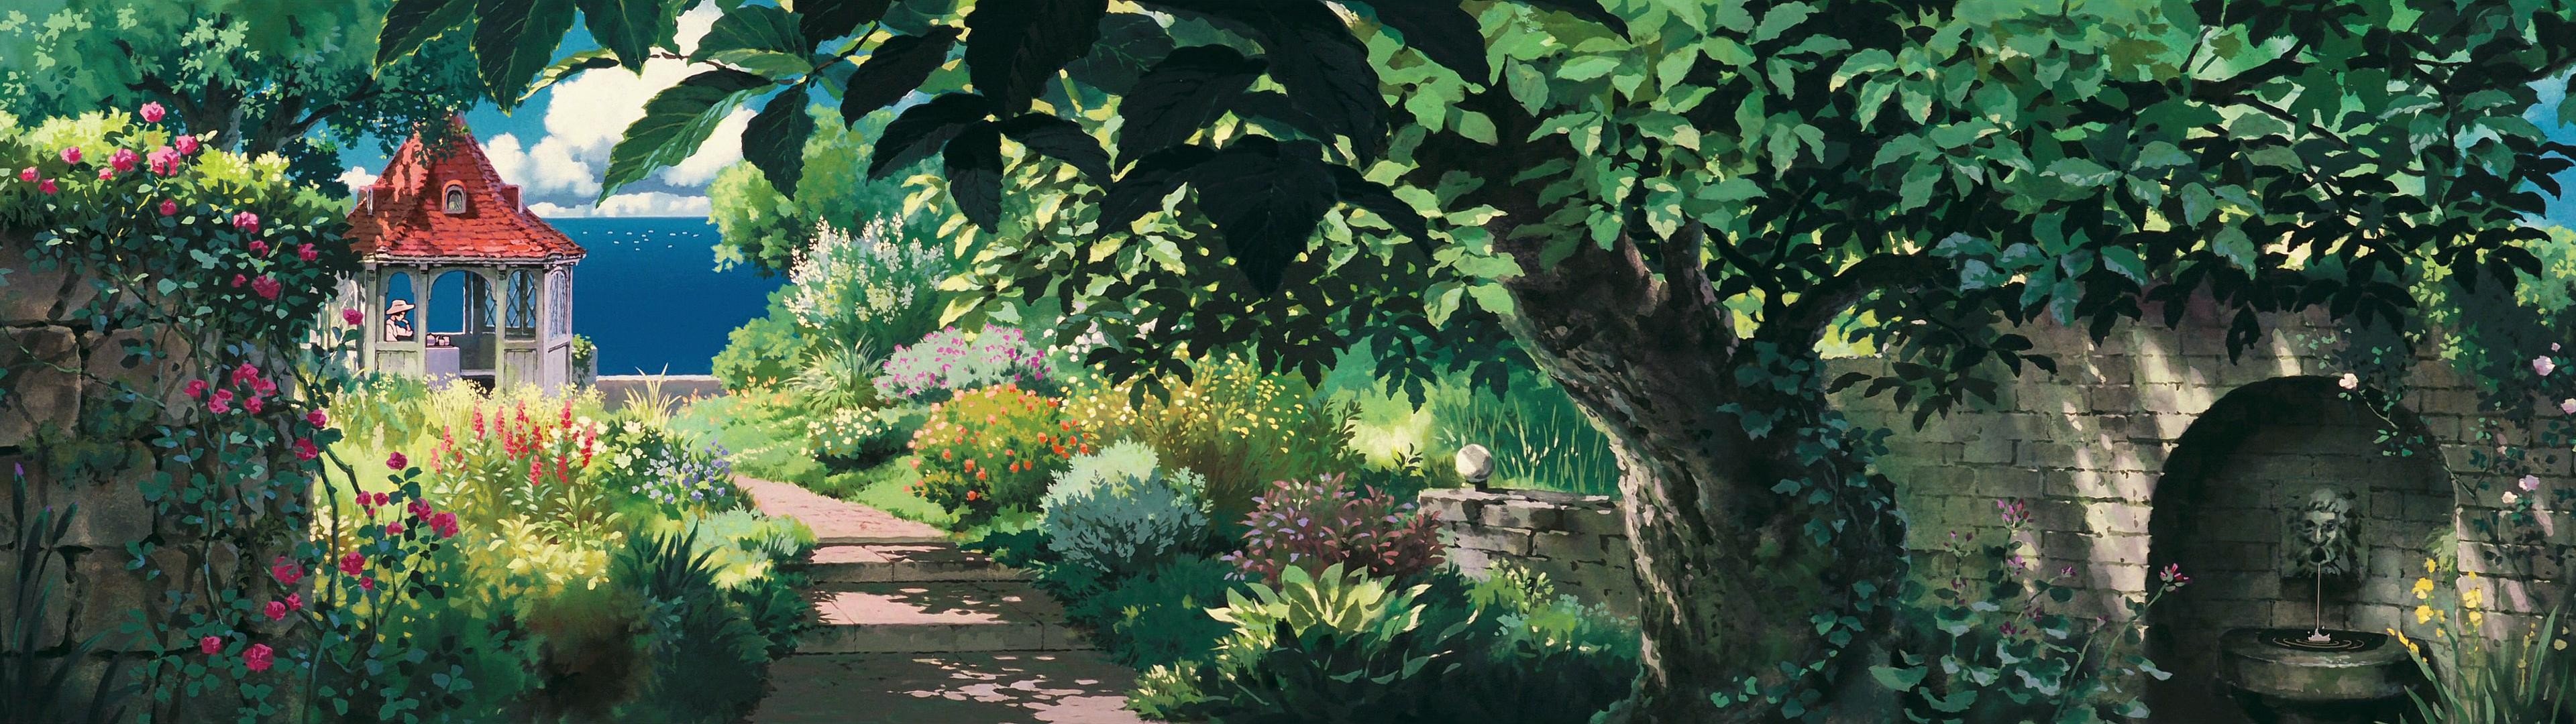 Studio Ghibli, Porco Rosso, Multiple display, Garden, Gazebo, Path HD  Wallpapers / Desktop and Mobile Images & Photos